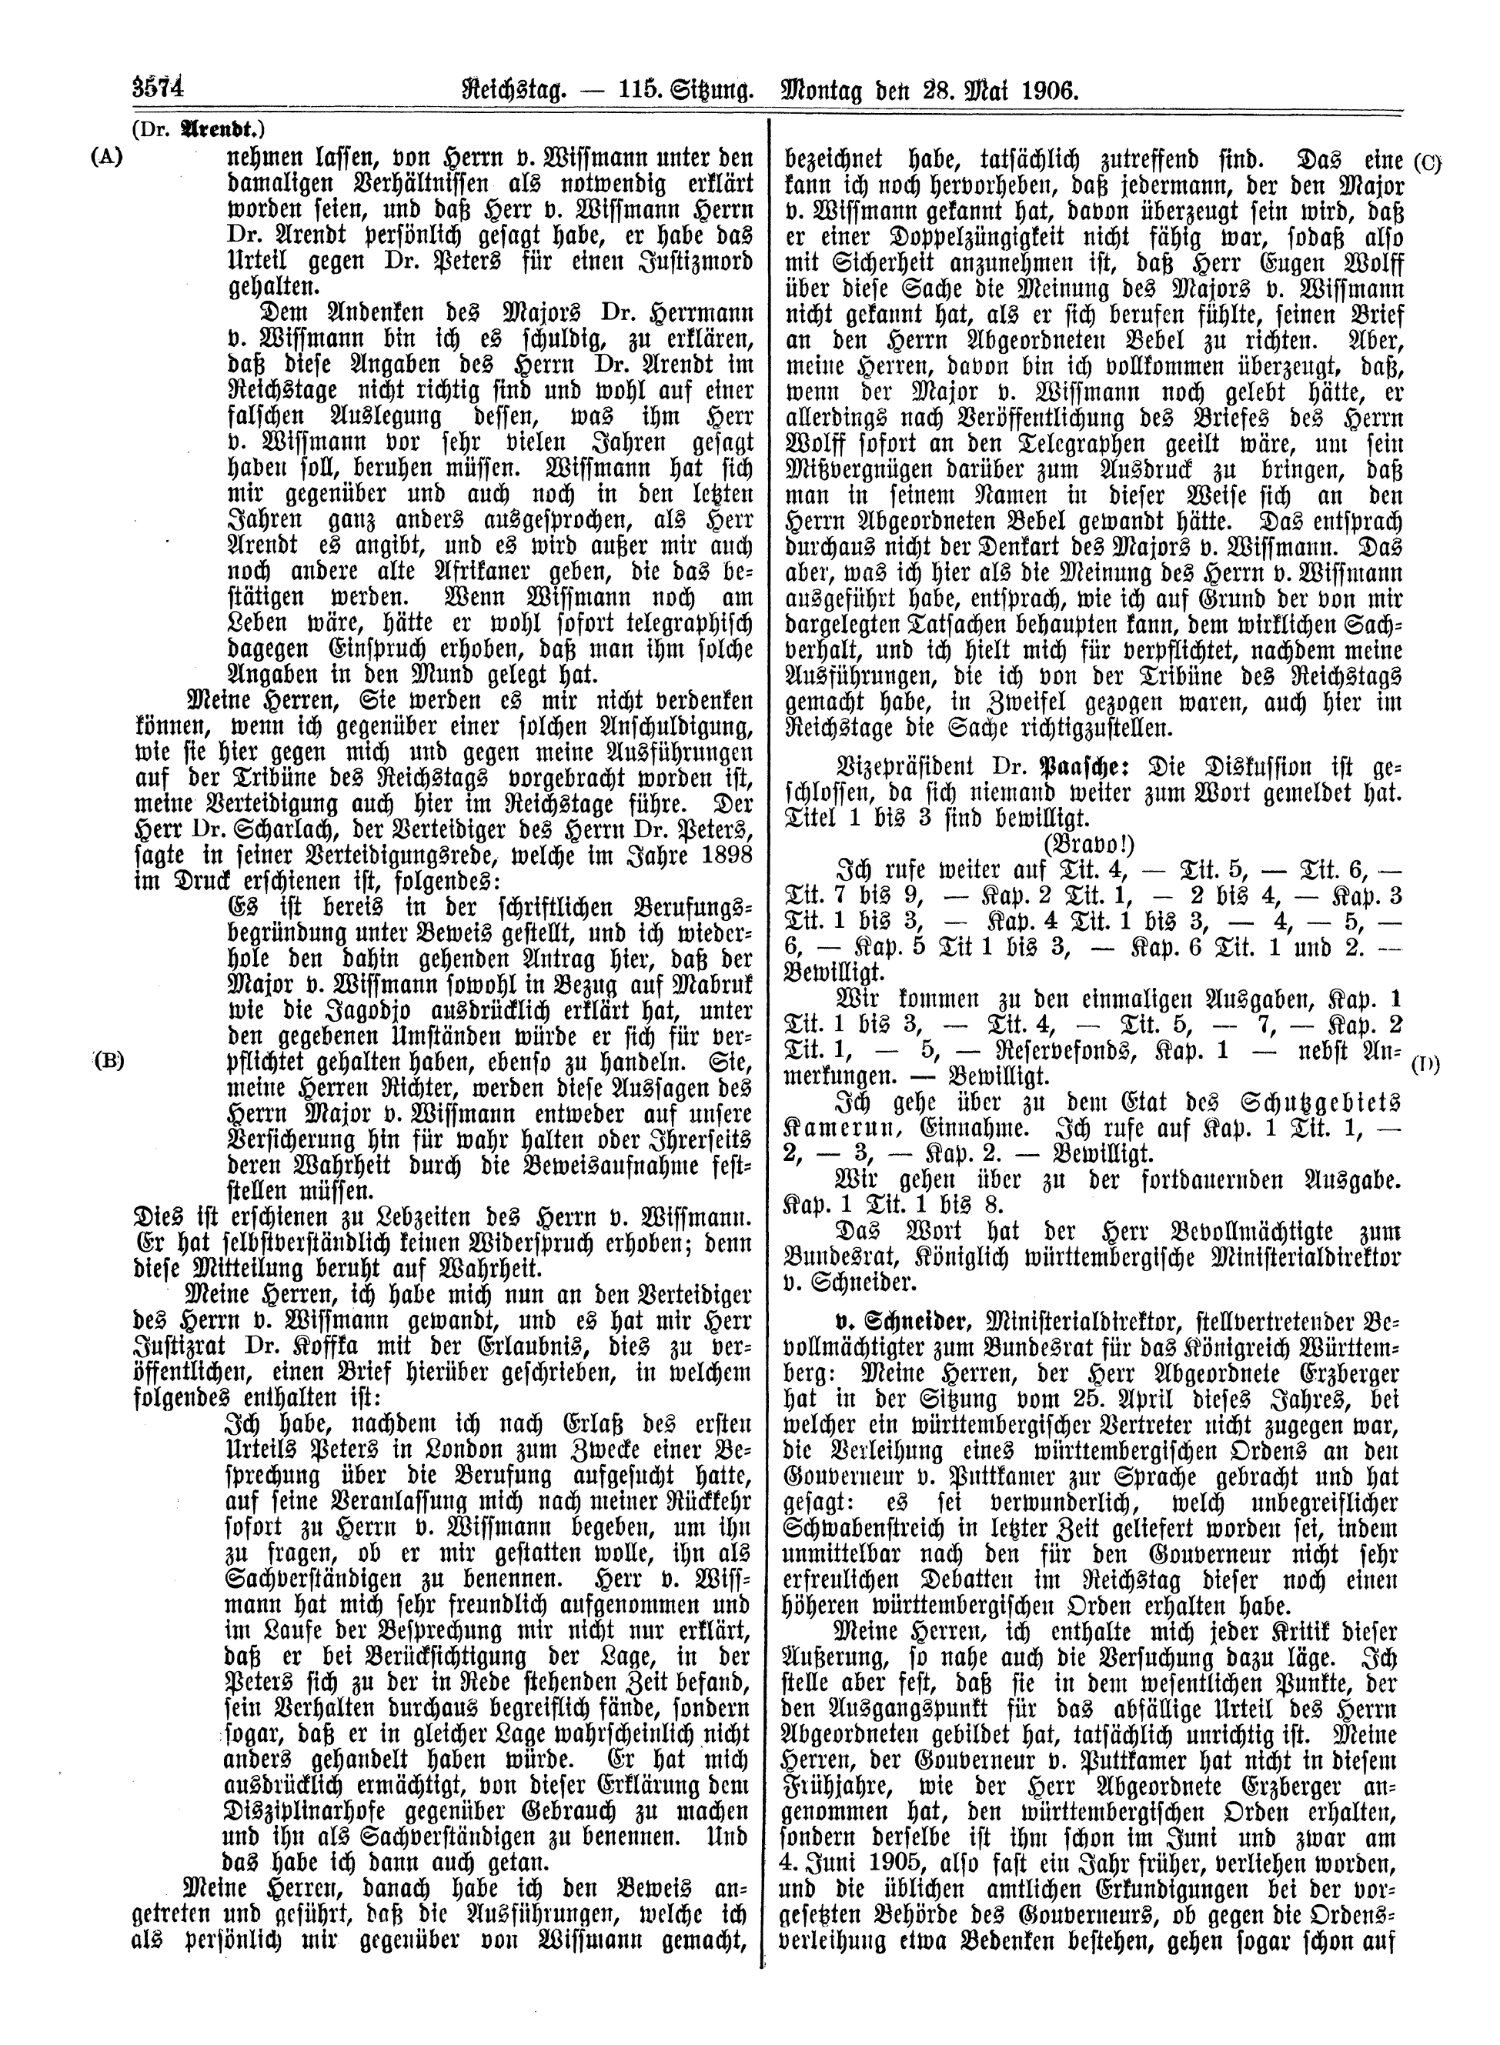 Scan of page 3574